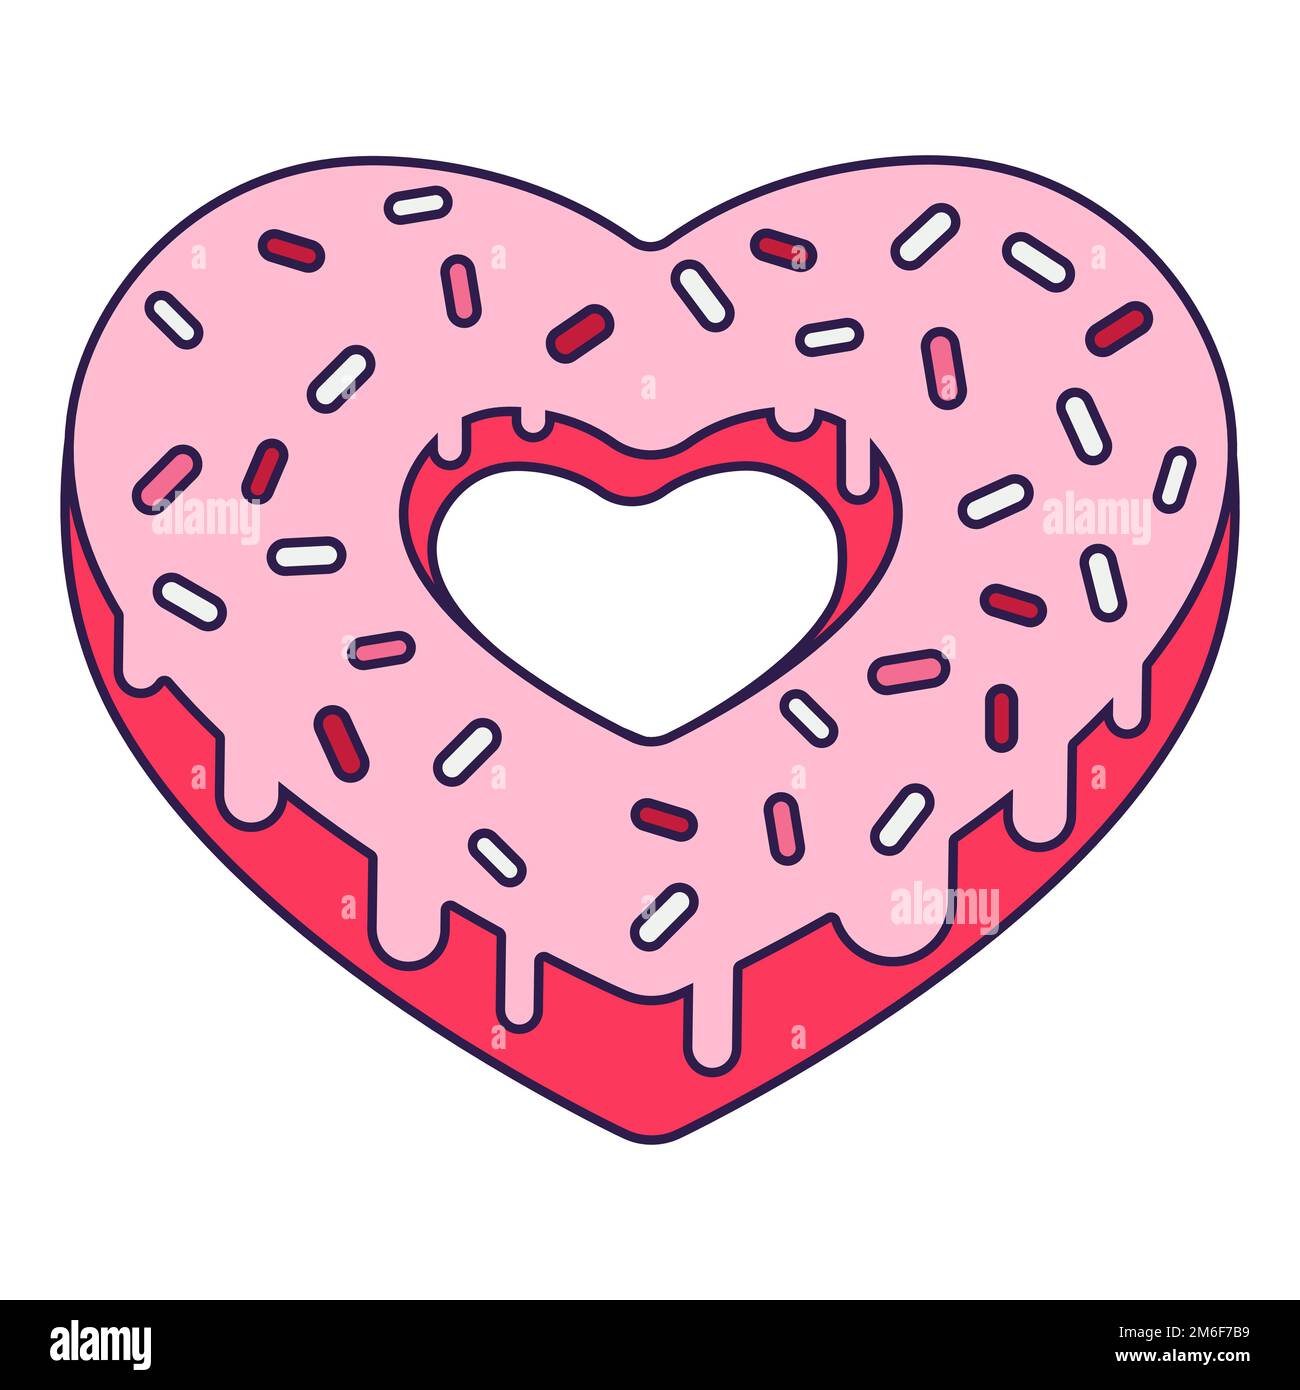 Retro Valentine Day icon donut heart of heart shape. Love symbol in the fashionable pop line art style. The sweet chocolate hearts are soft pink, red Stock Vector